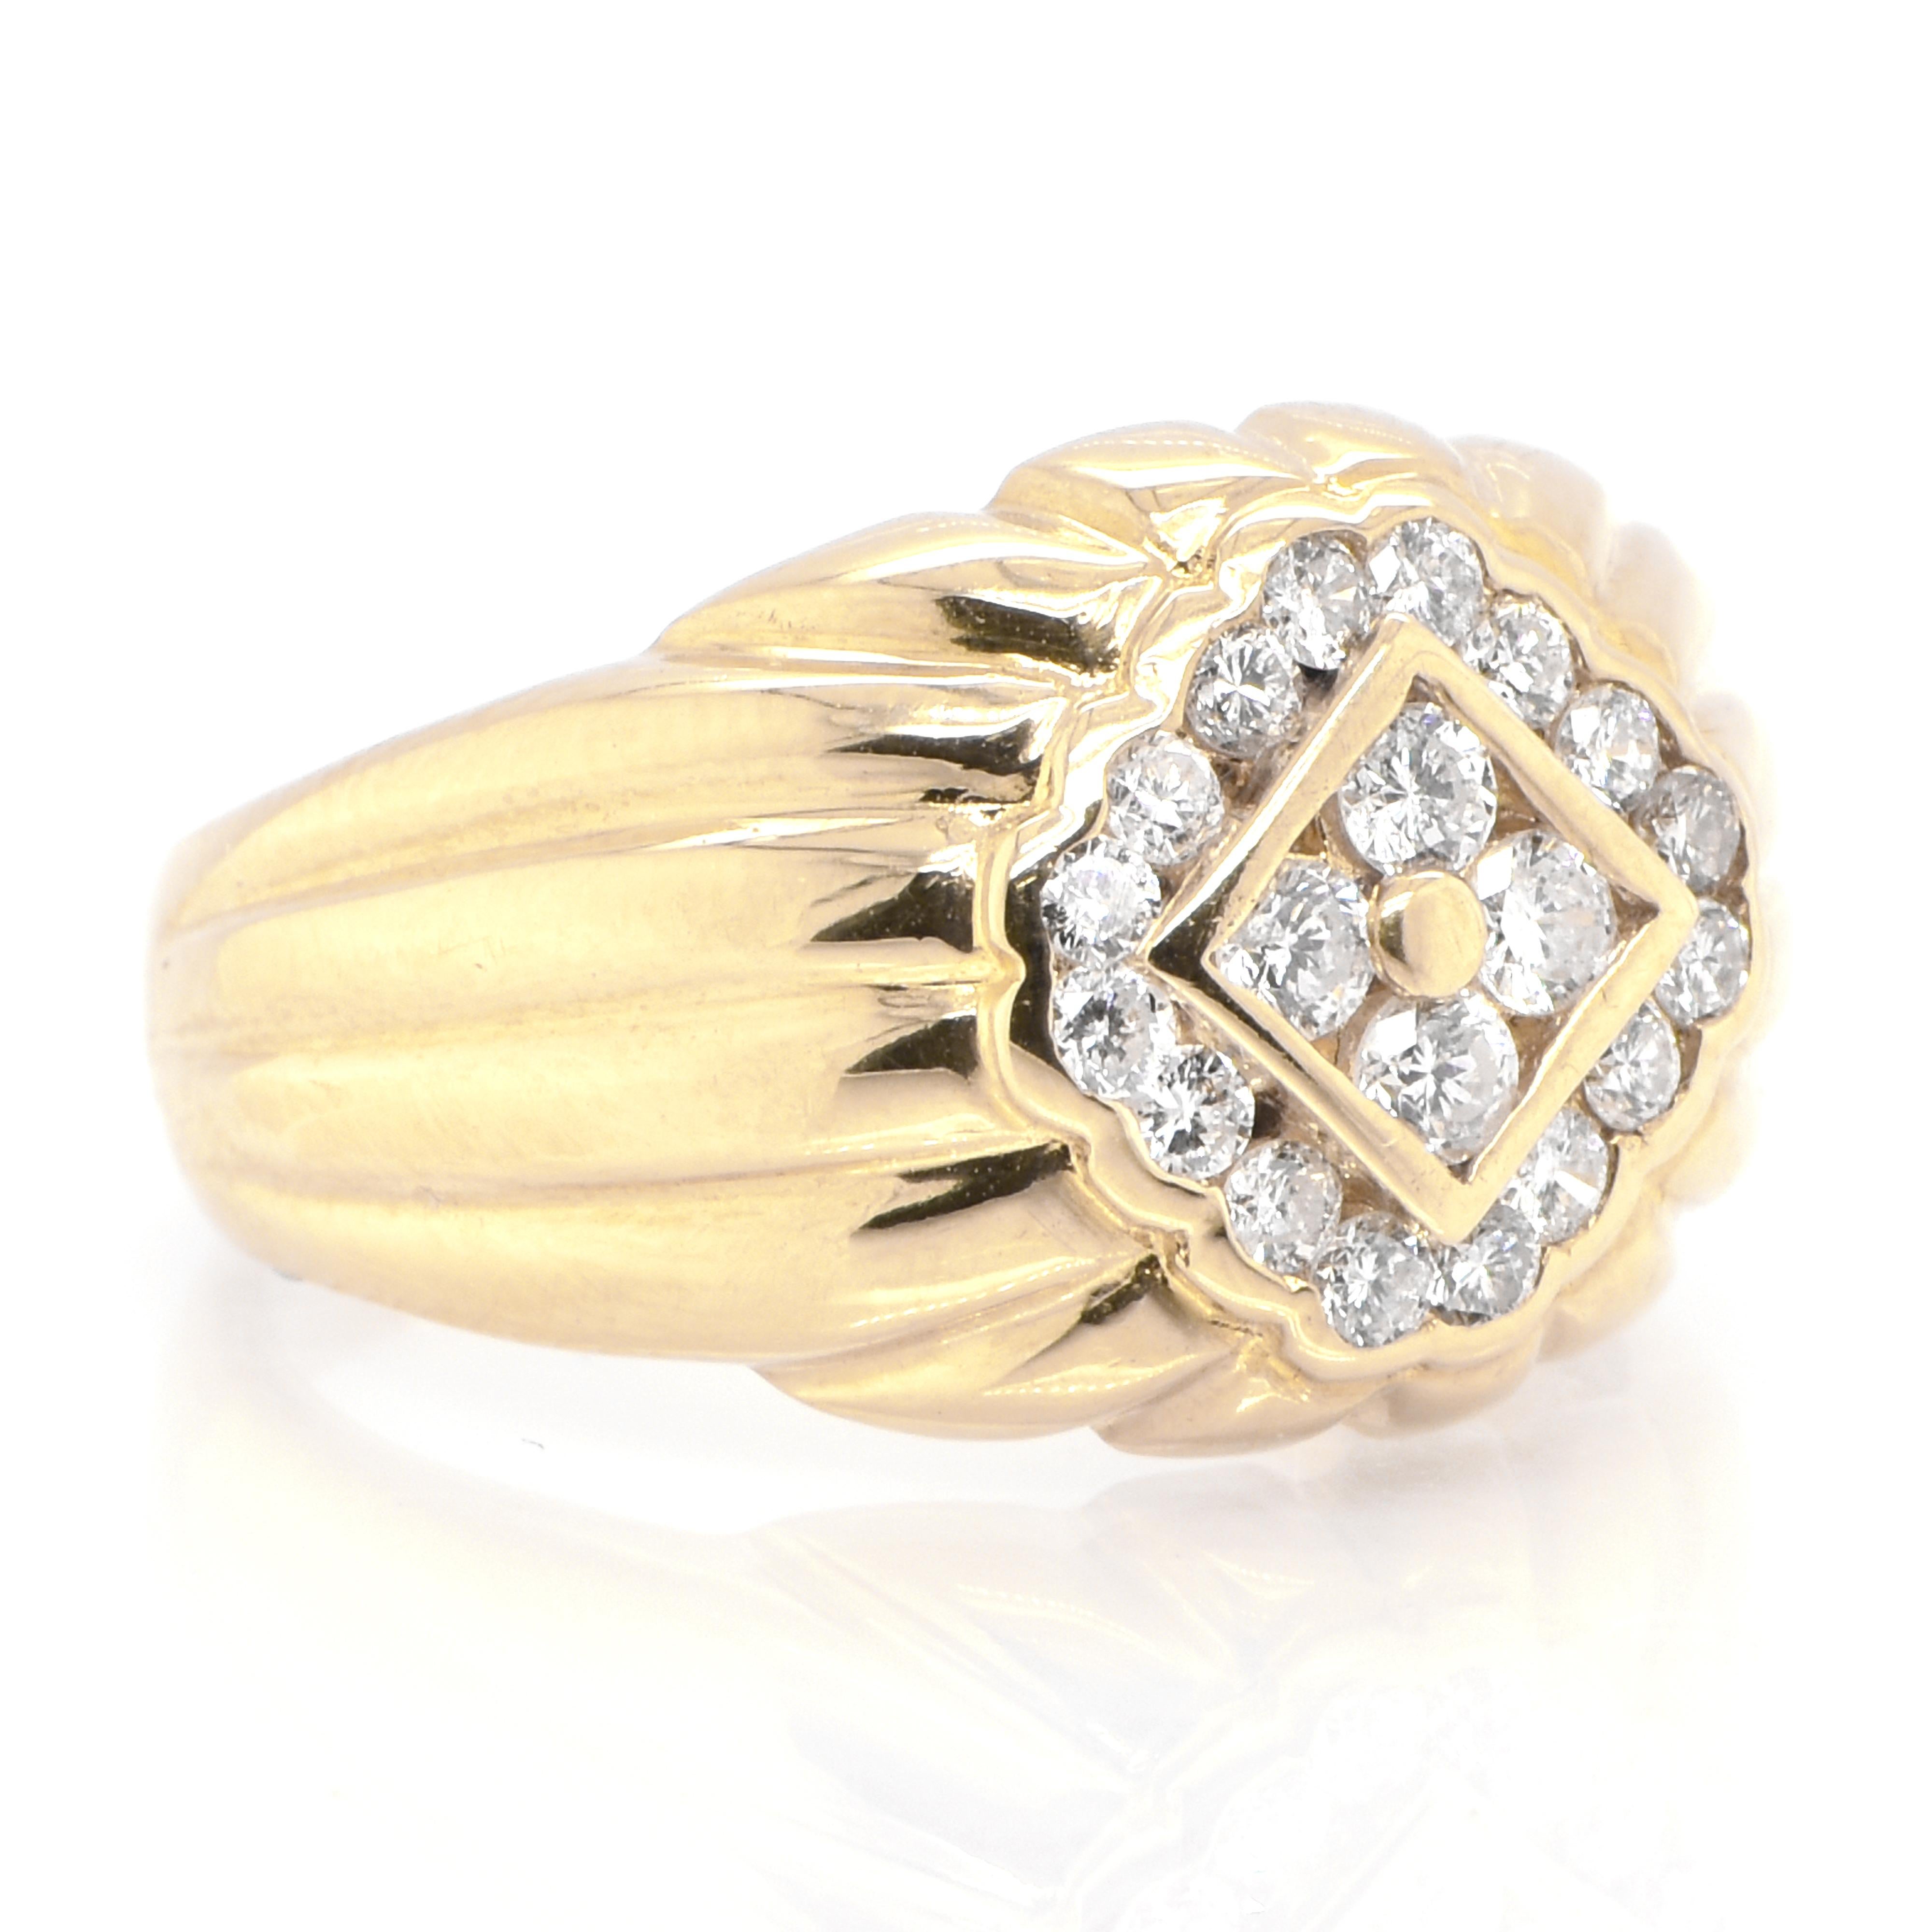 A beautiful ring featuring 0.52 Carats Melee Diamonds in 18 Karat Yellow Gold. Diamonds have been adorned and cherished throughout human history and date back to thousands of years. They are rated as 10 on the Mohs Hardness Scale hence are